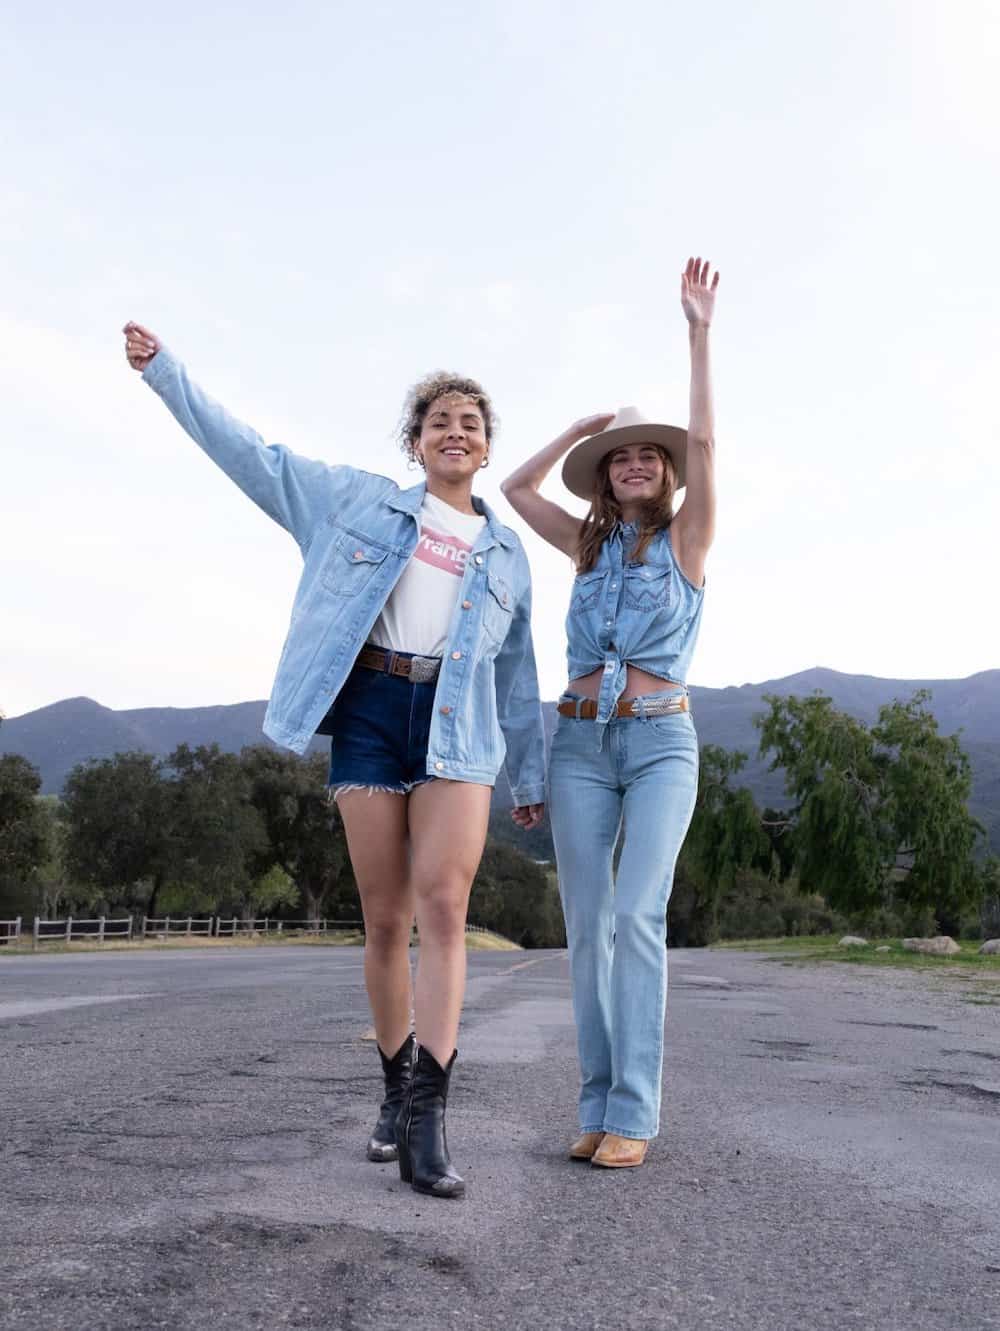 Two women wearing cute rodeo outfits with cowboy boots, denim shorts, jeans, denim shorts, and a wrangler top